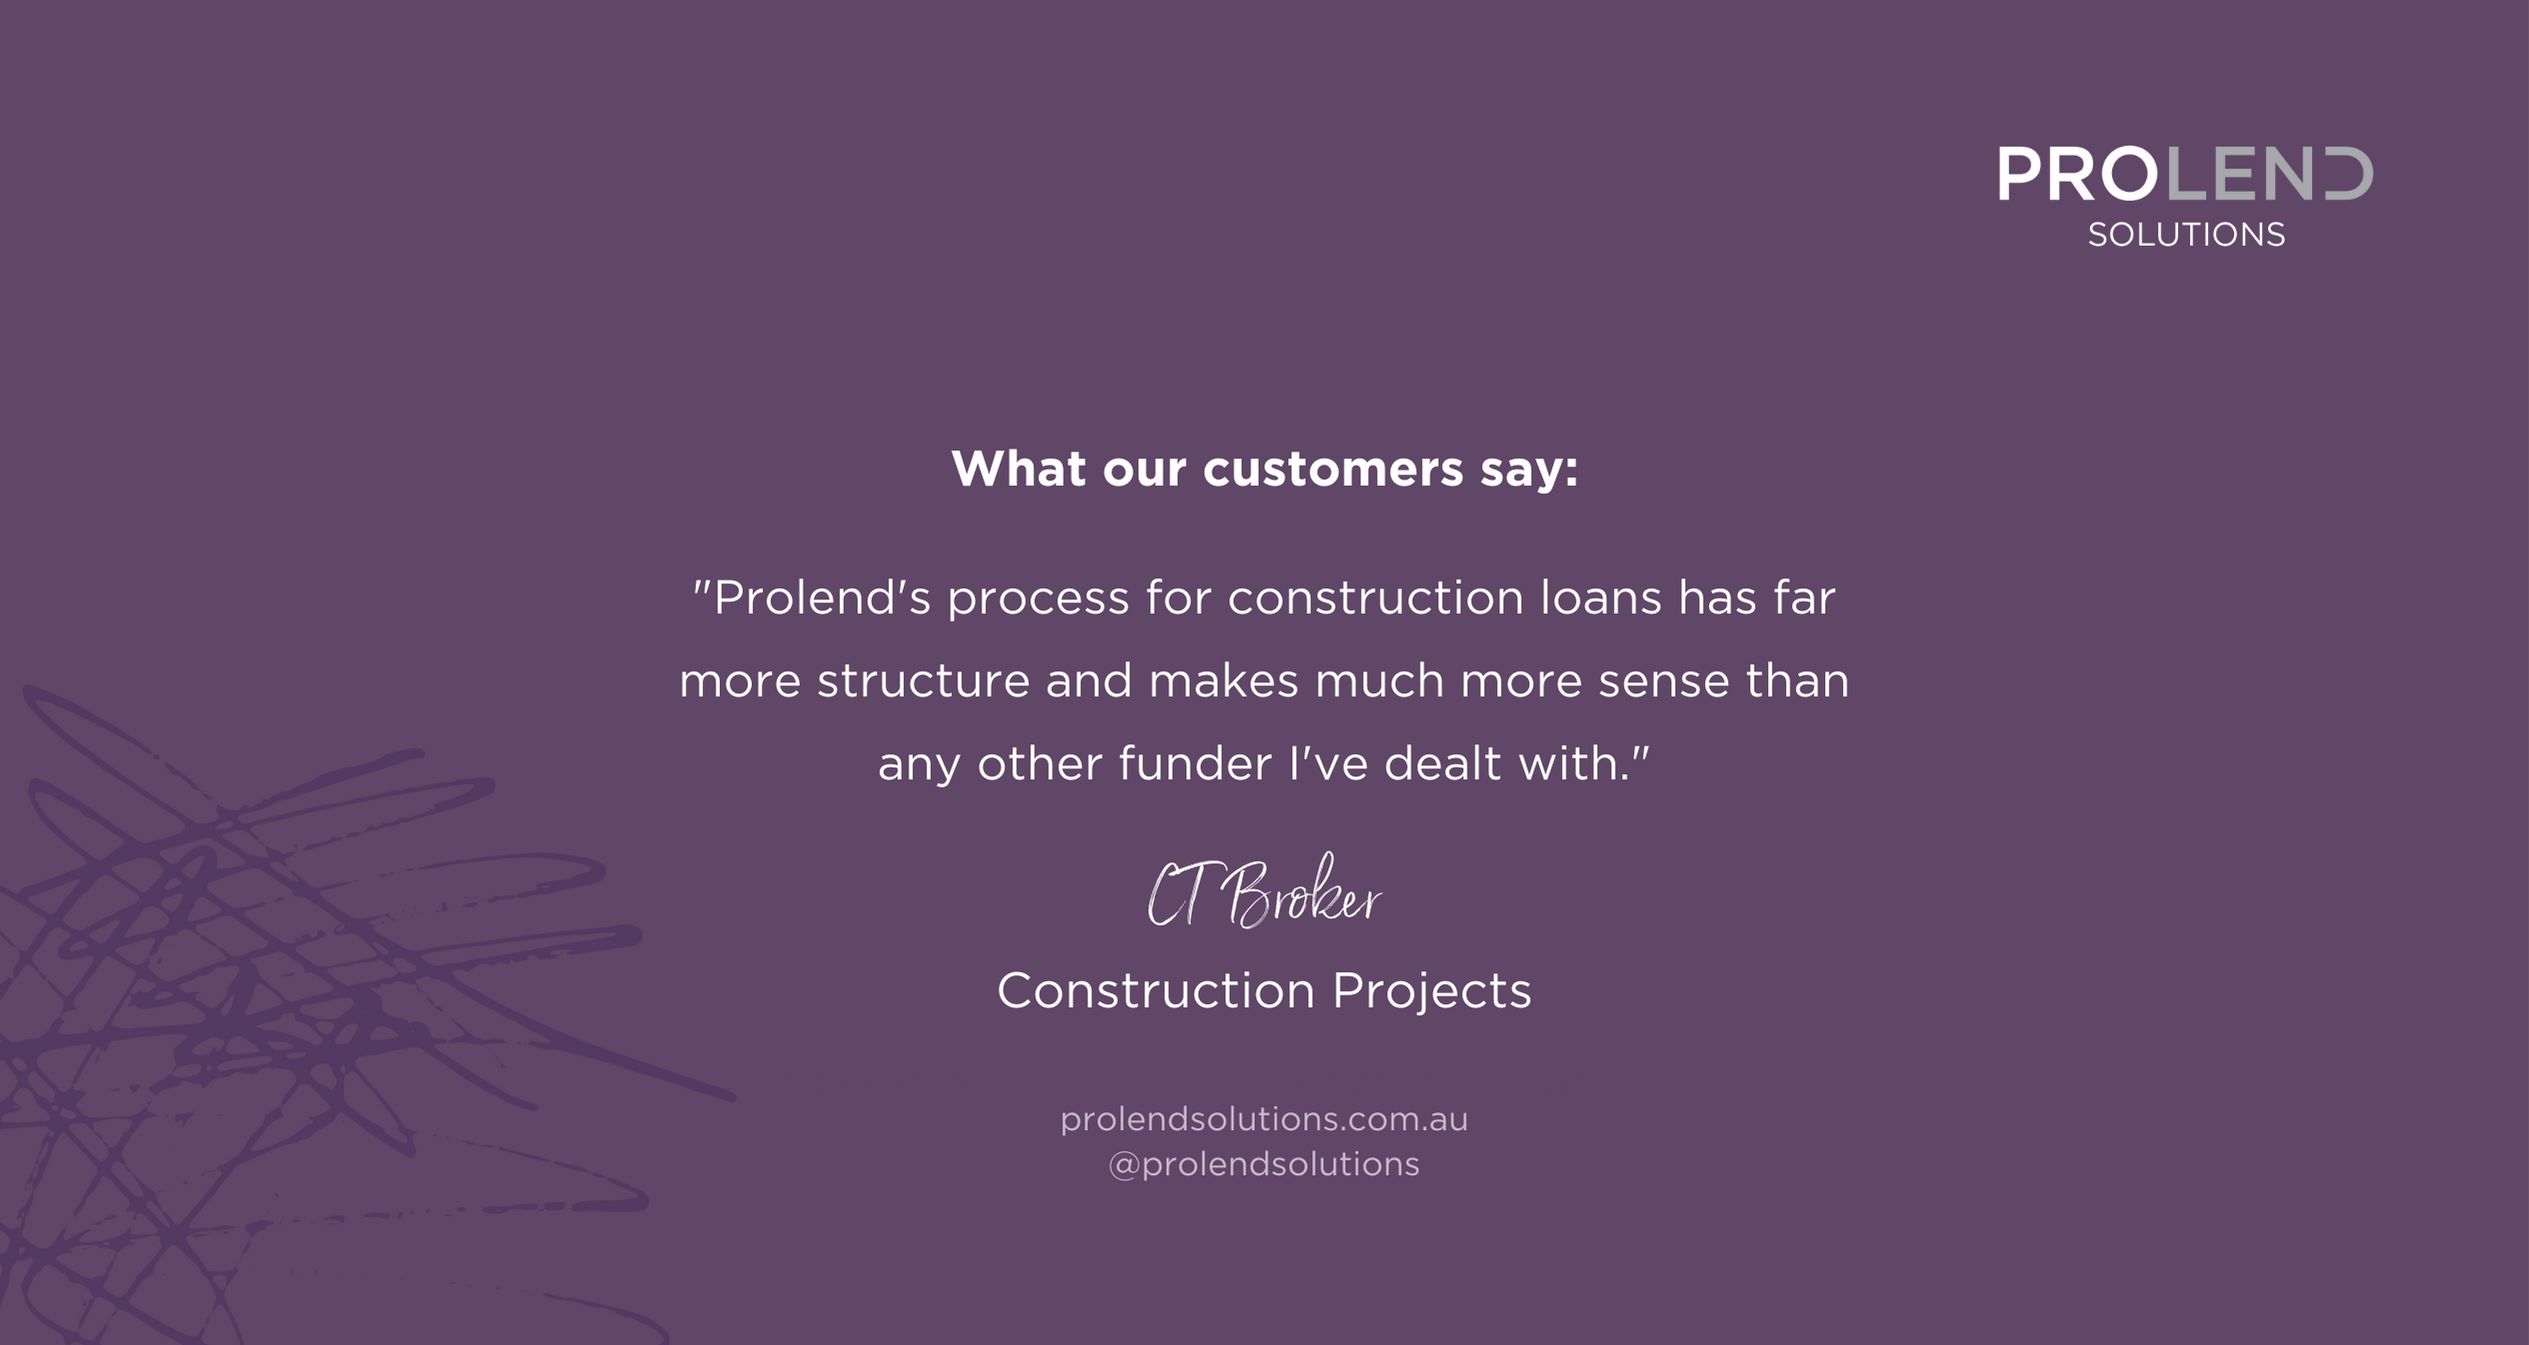 CT Broker, Customer Testimonial - Prolend's process for construction loans has far more structure and makes much more sense than any other funder I've dealt with.